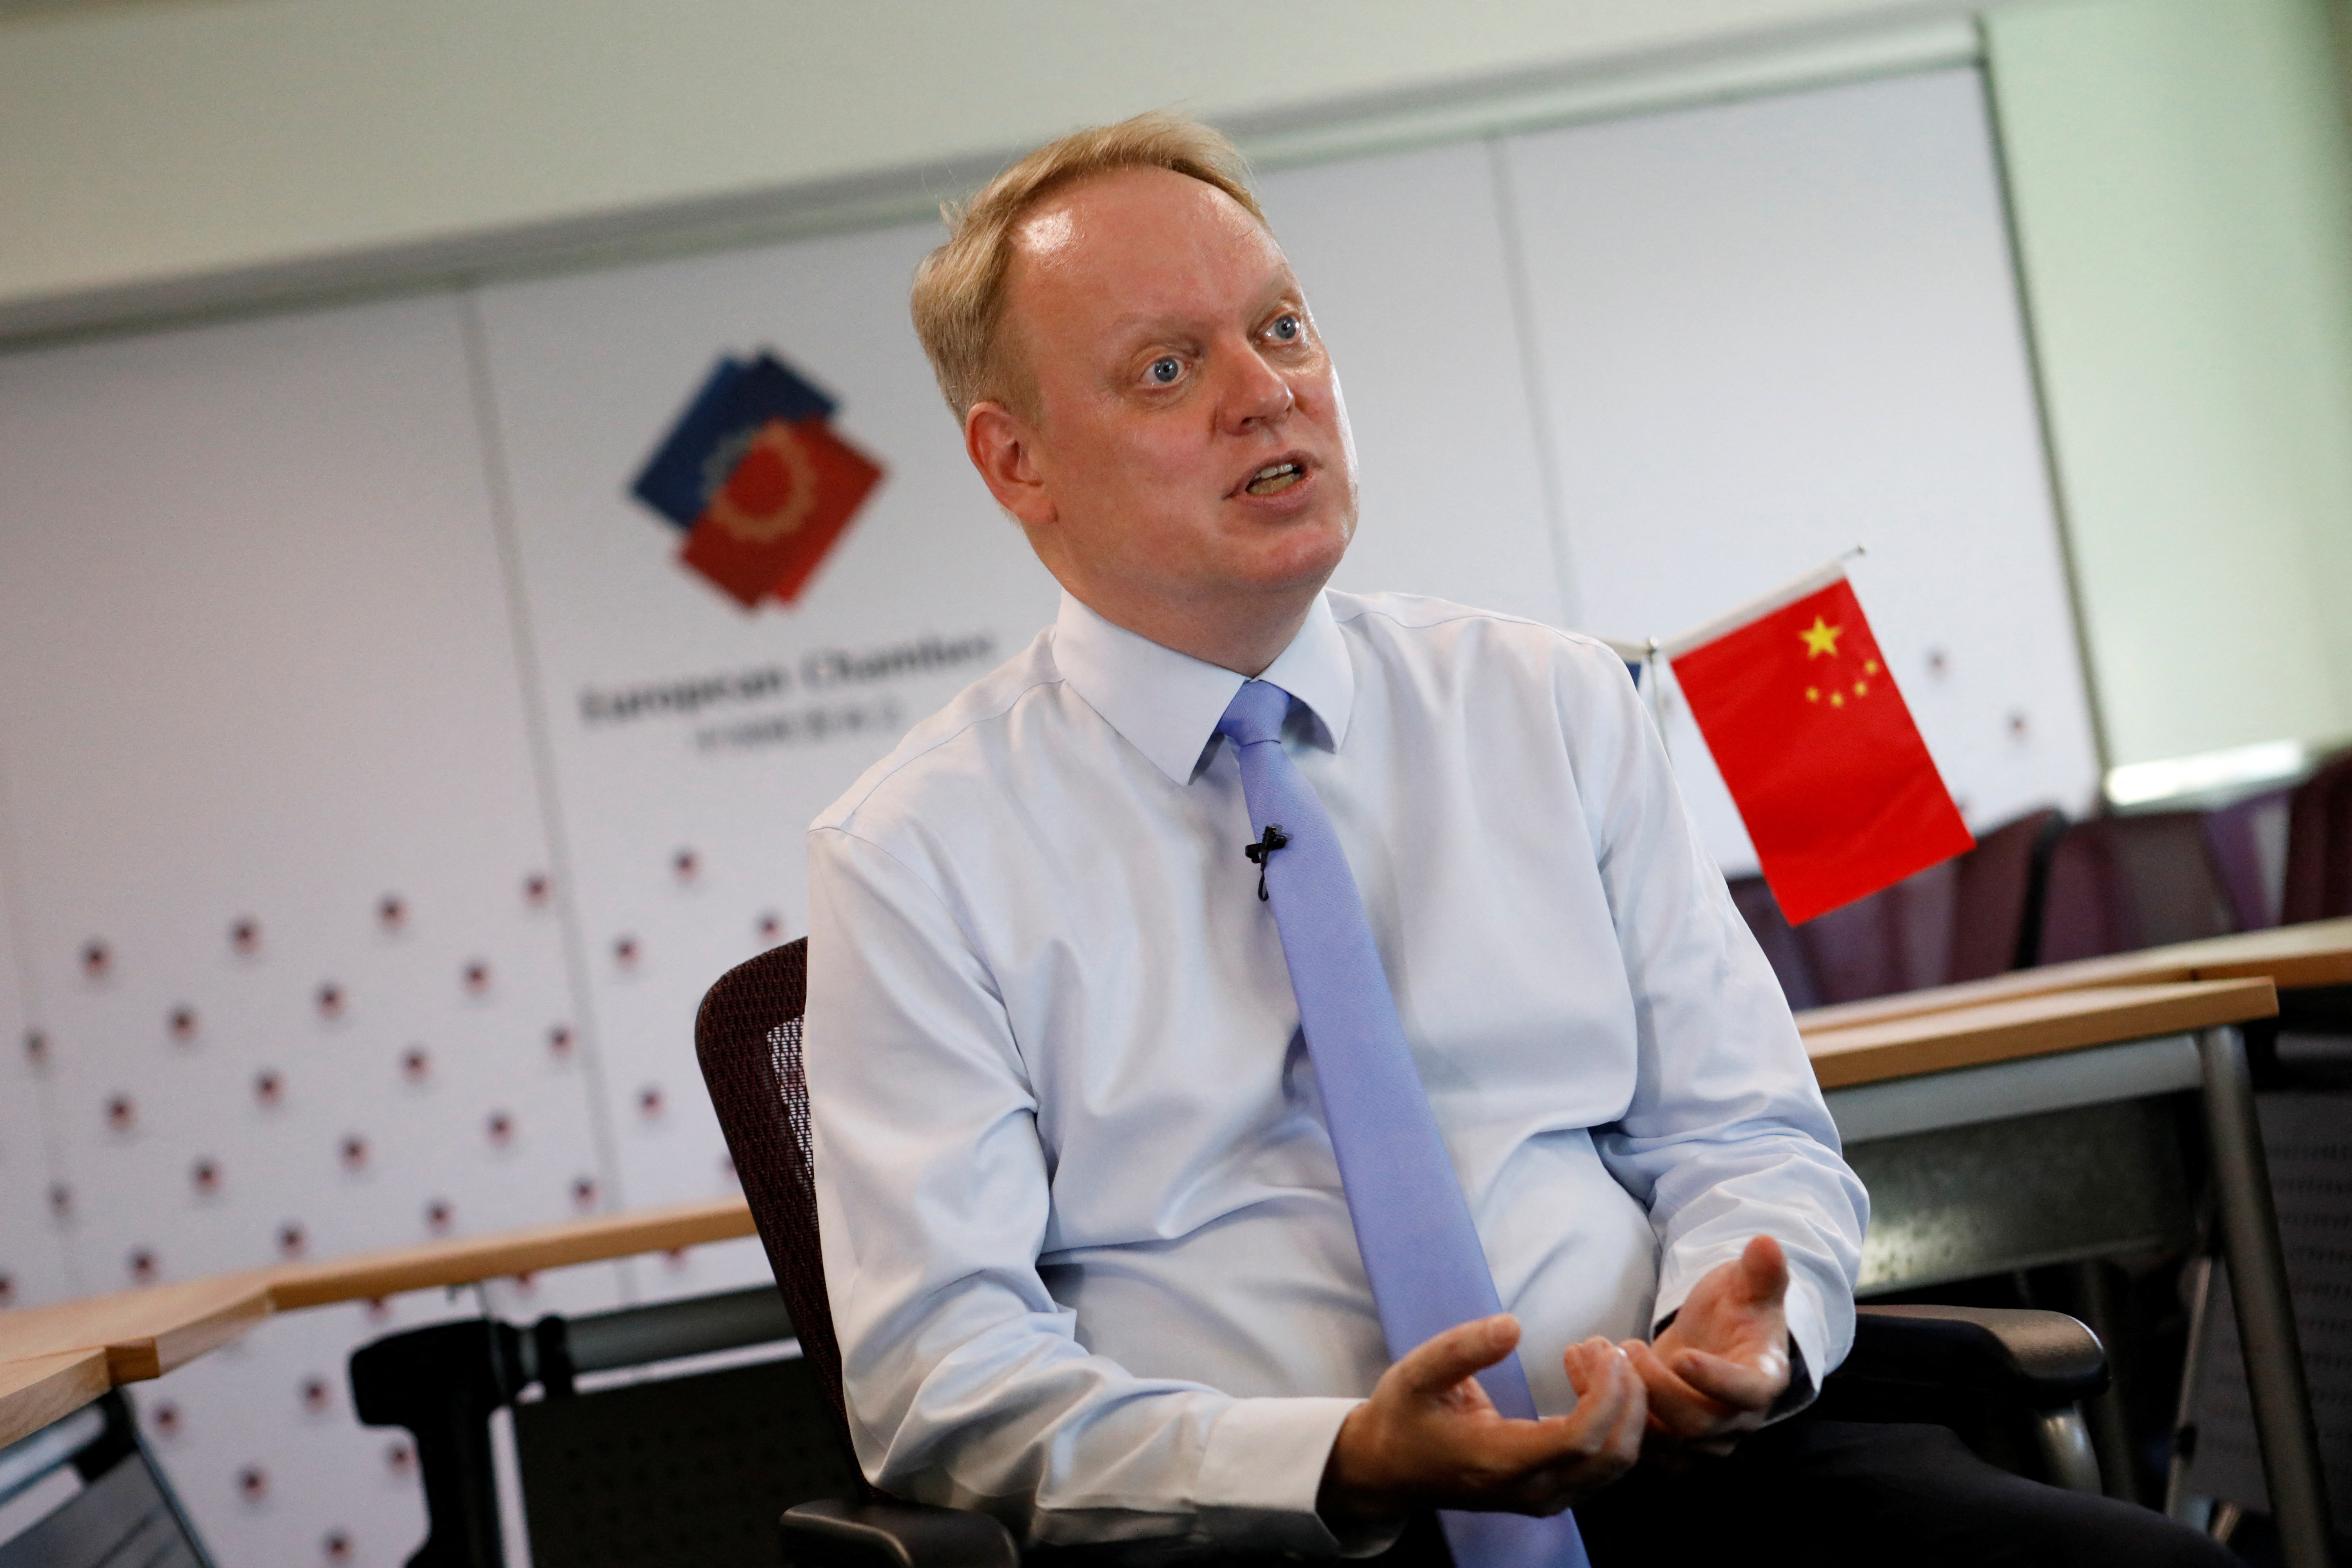 China's European Union Chamber of Commerce President Jens Eskelund attends an interview in Beijing